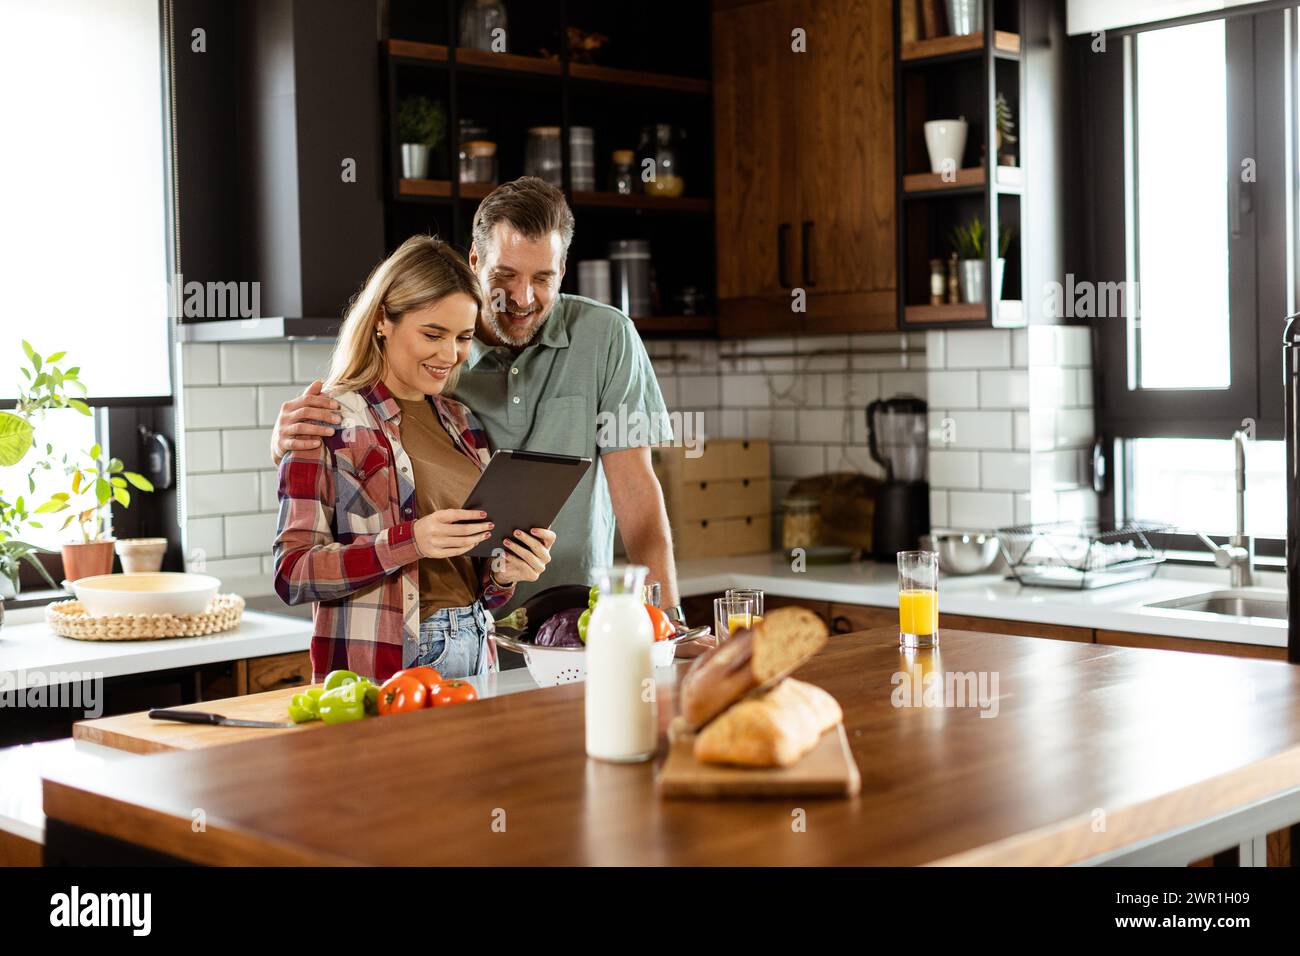 A cheerful couple stands in a well-lit kitchen, engrossed in a digital tablet among fresh ingredients Stock Photo